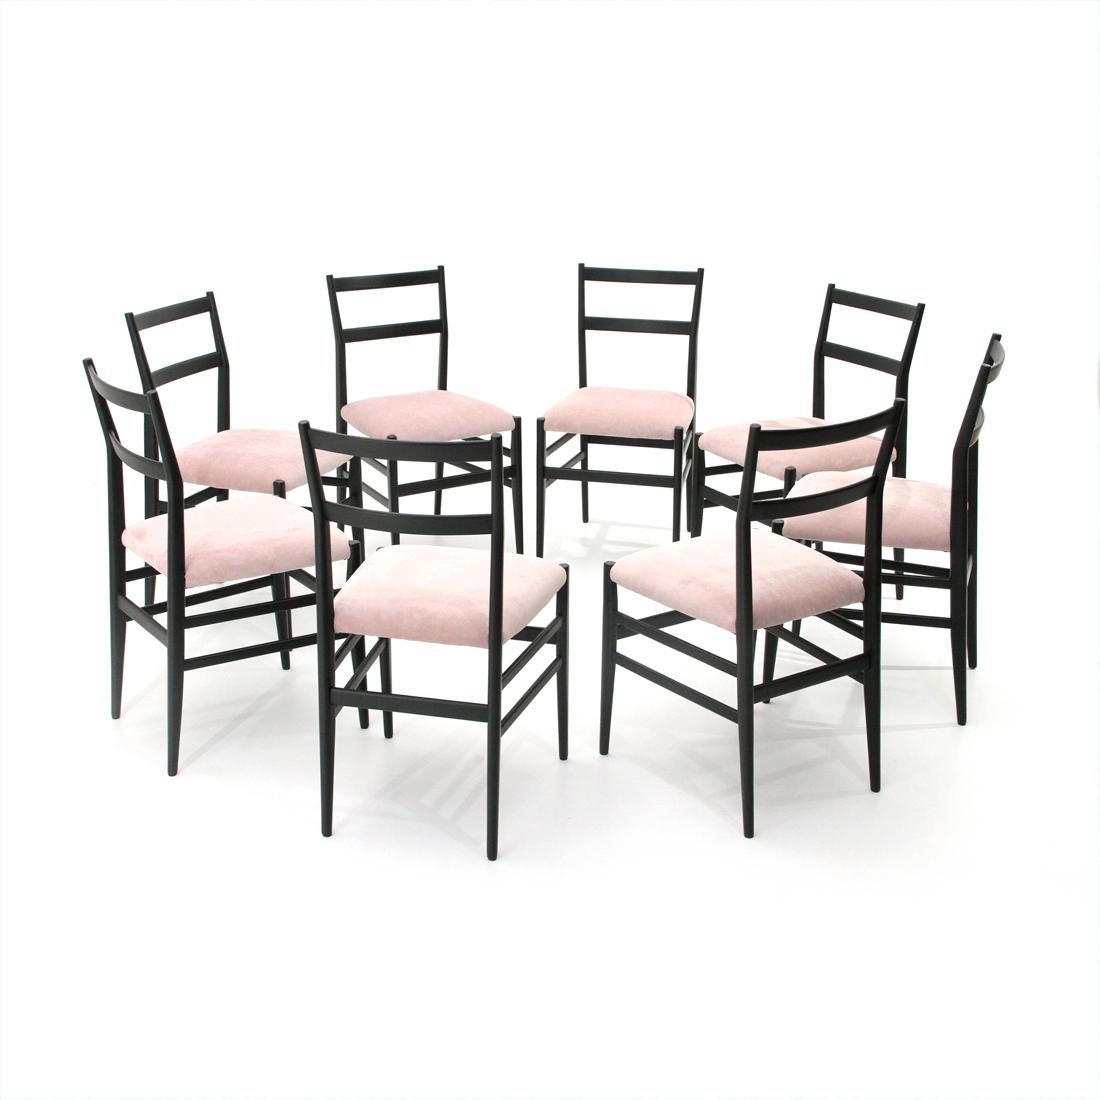 Eight chairs produced in the 1950s by Cassina designed by Gio Ponti.
Black painted solid wood frame.
Padded and lined seat in new pink velvet fabric.
Good general condition, completely restored.

Dimensions: Length 43 cm, depth 43 cm, height 83